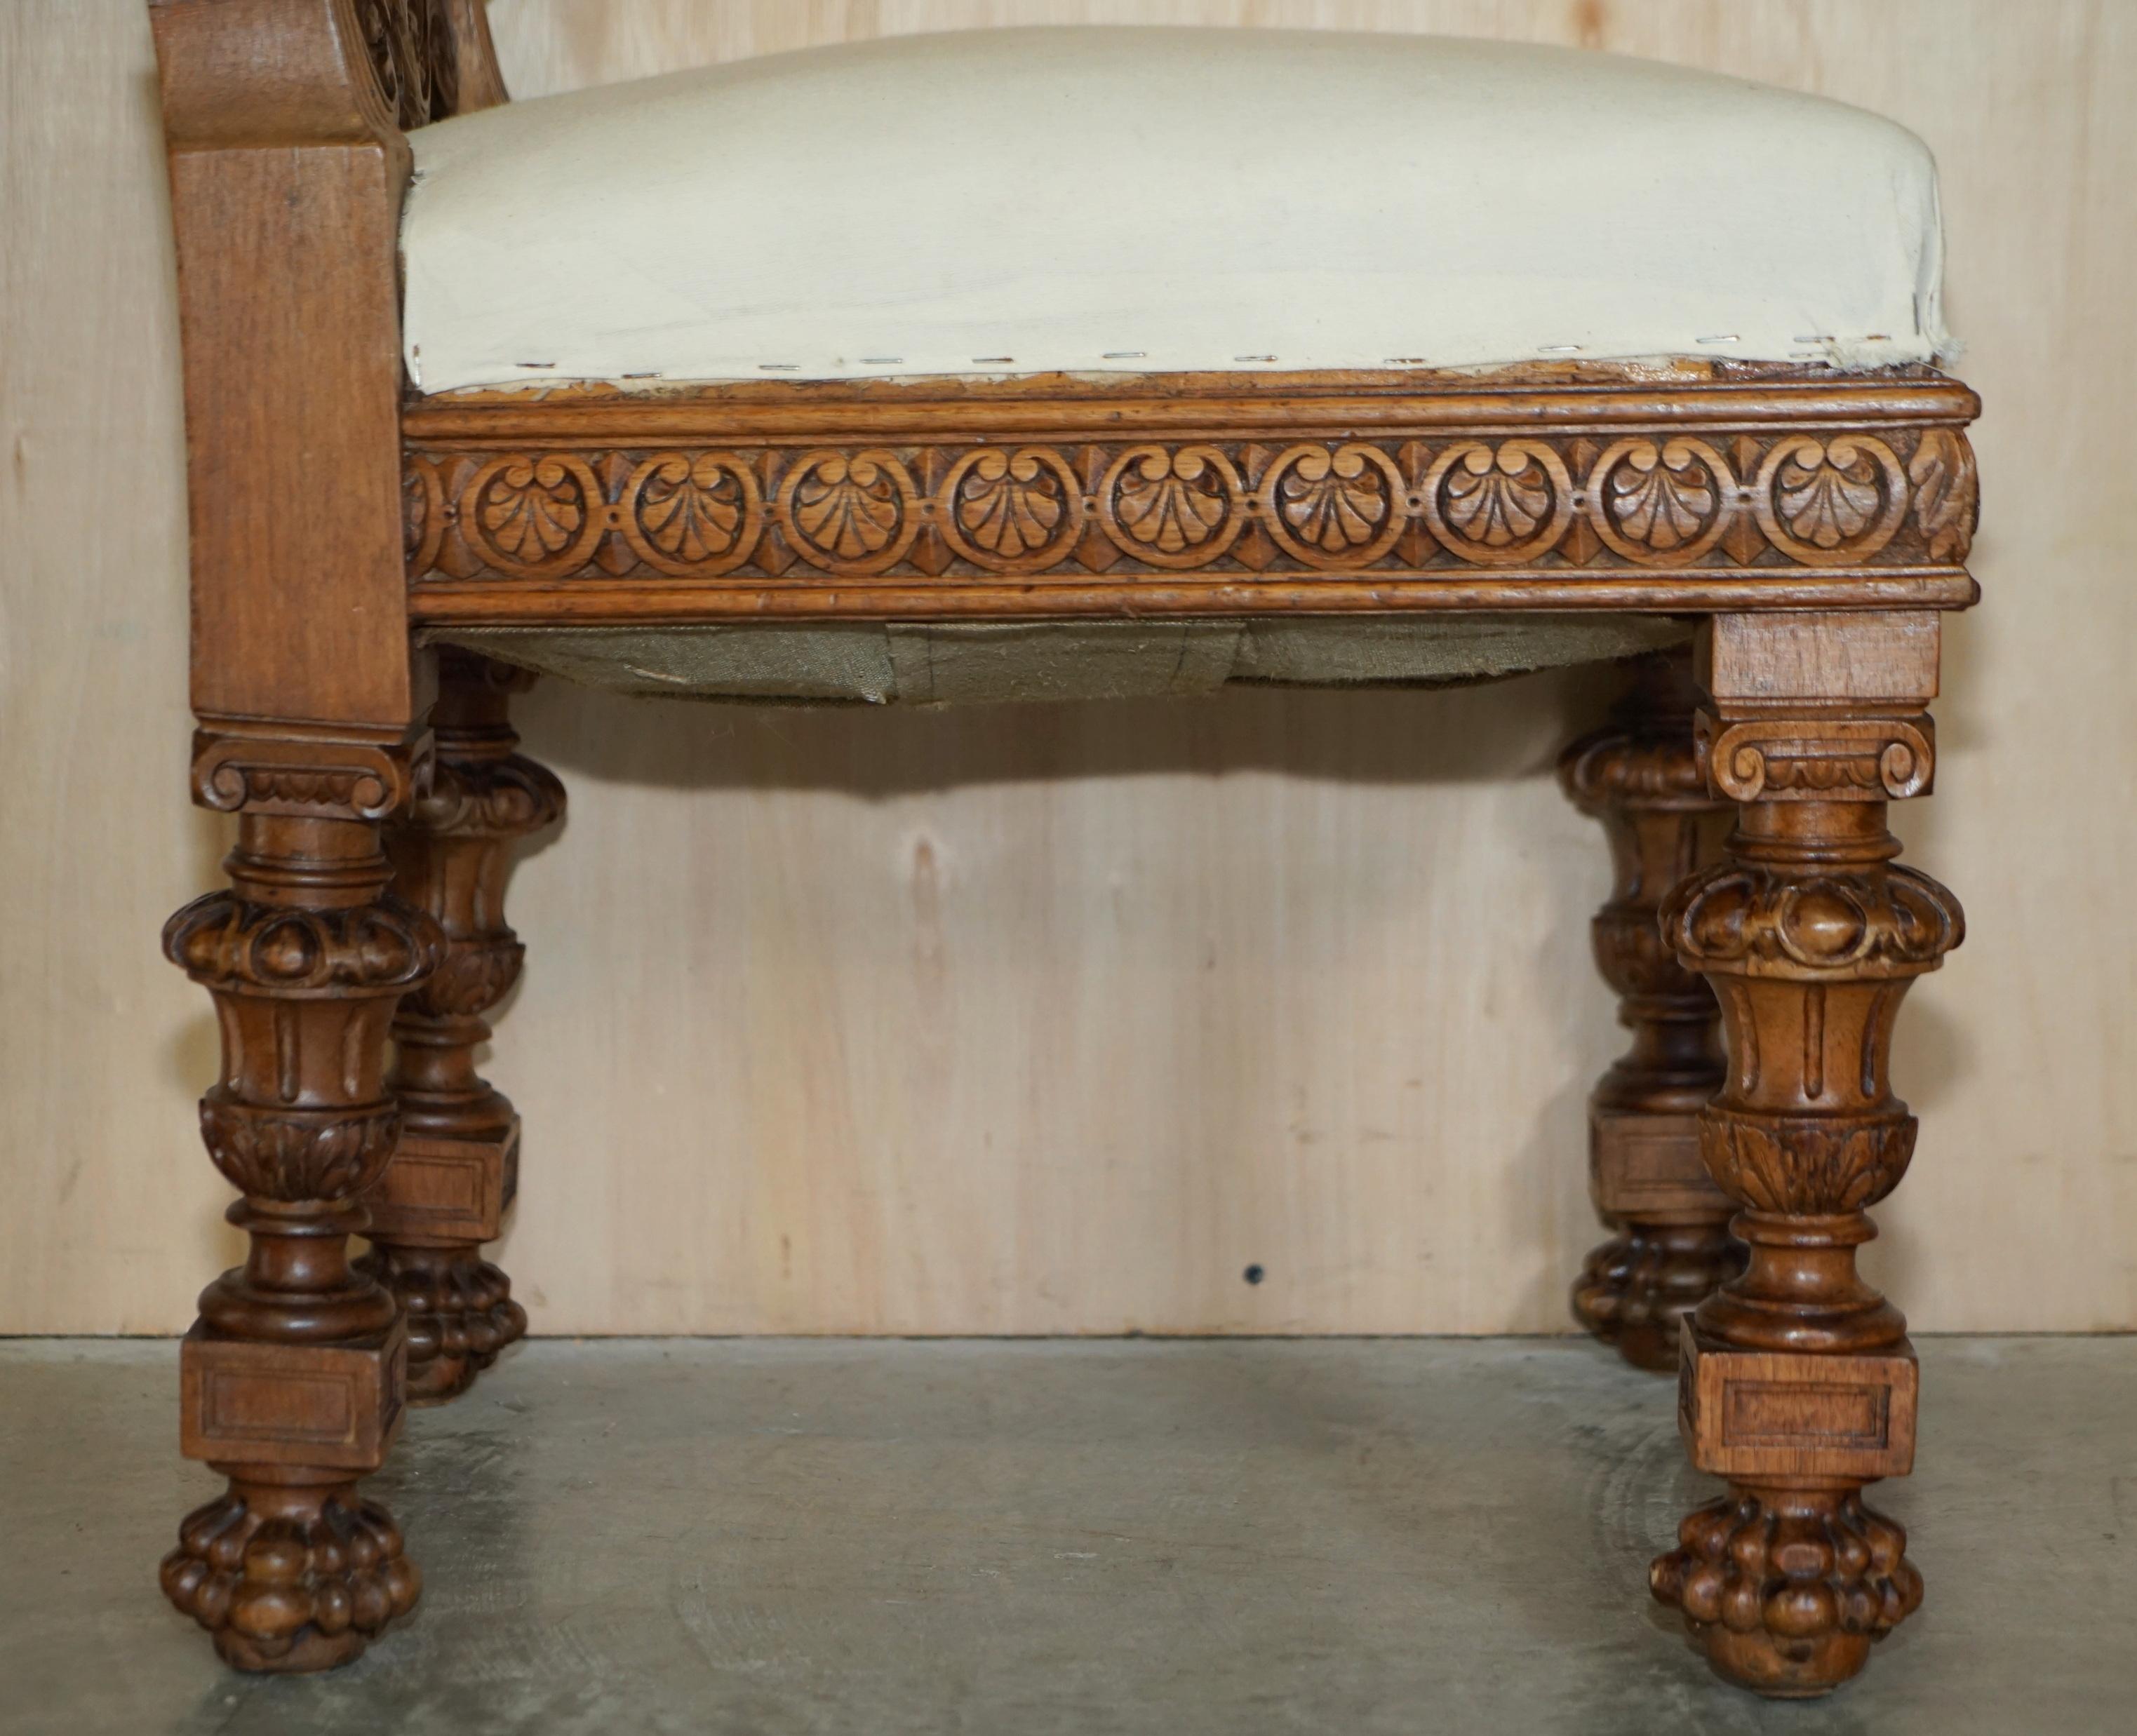 Pair of Ornate Carved Antique Italian Throne Chairs with Griffins / Dragons For Sale 11